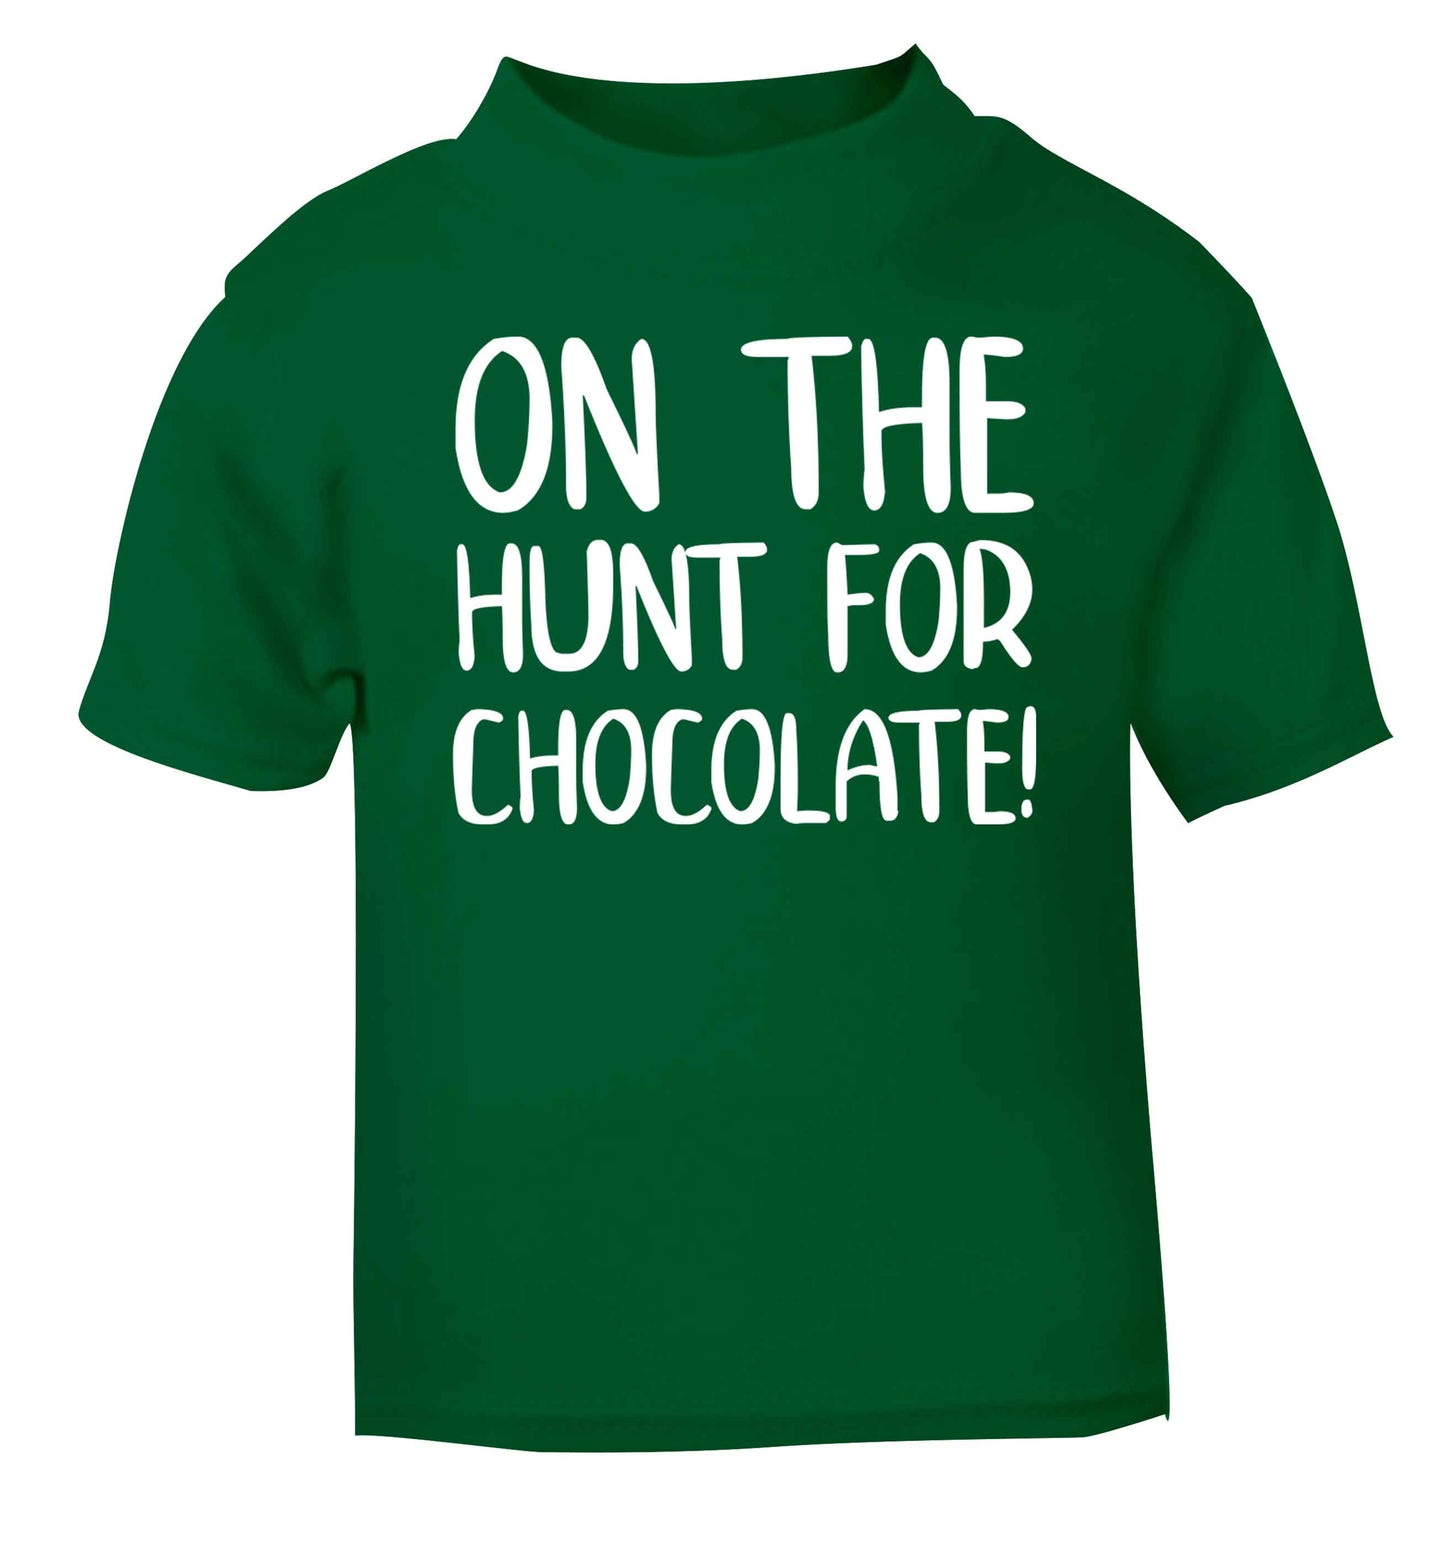 On the hunt for chocolate! green baby toddler Tshirt 2 Years